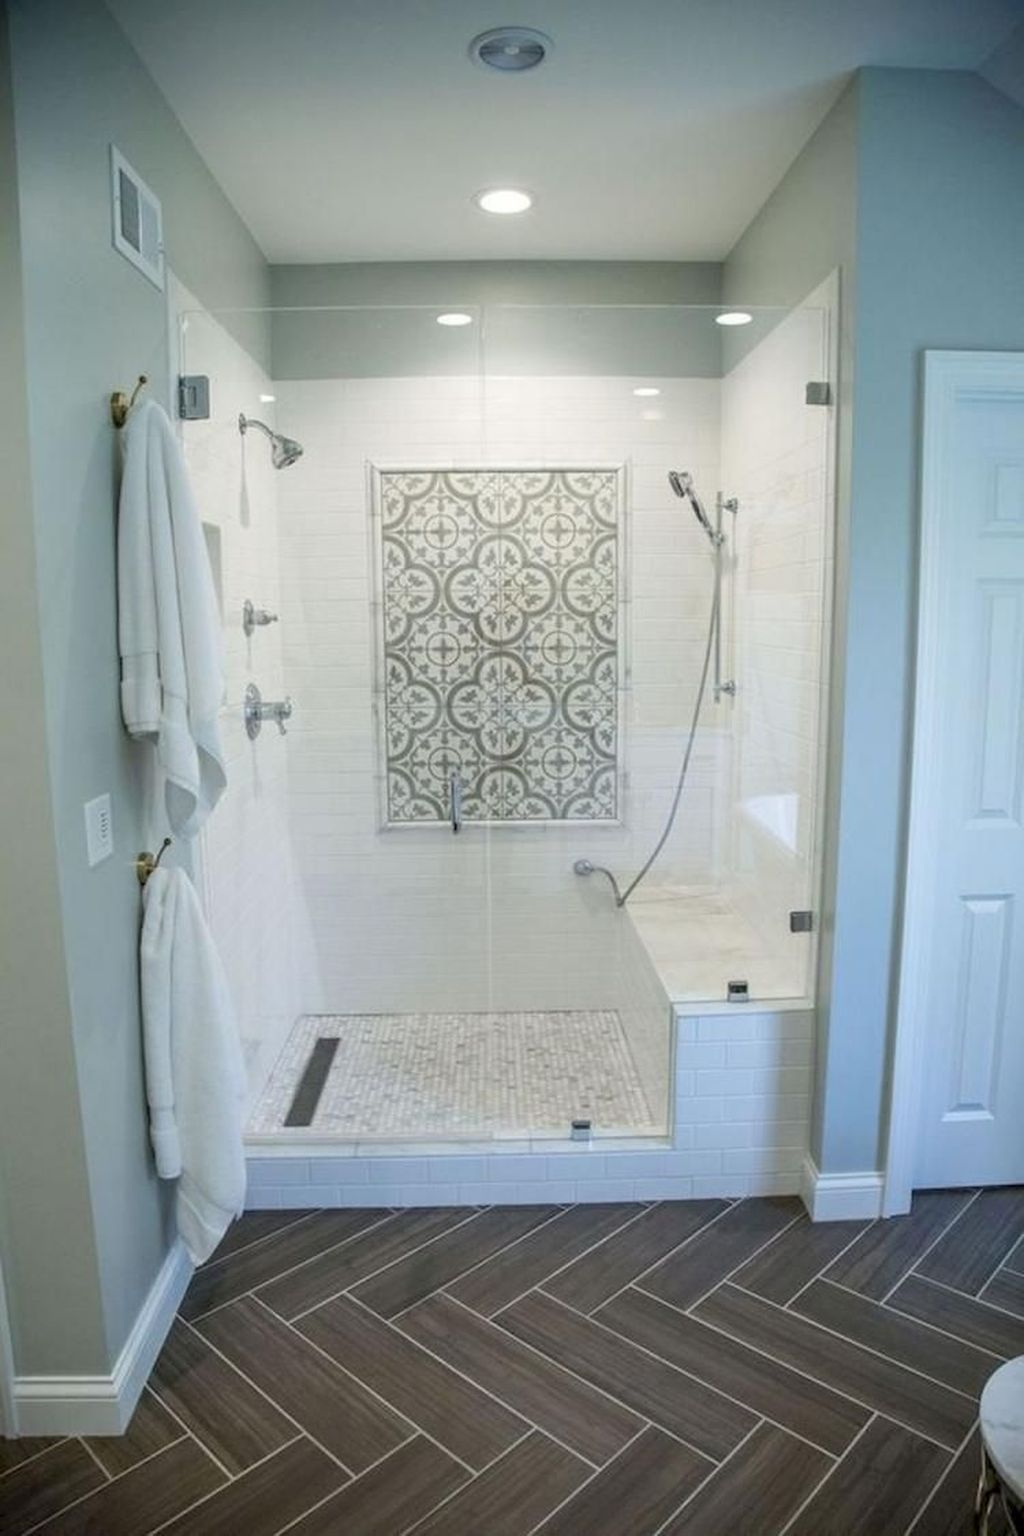 Cute Remodel Shower Design Ideas To Rock This Season 10